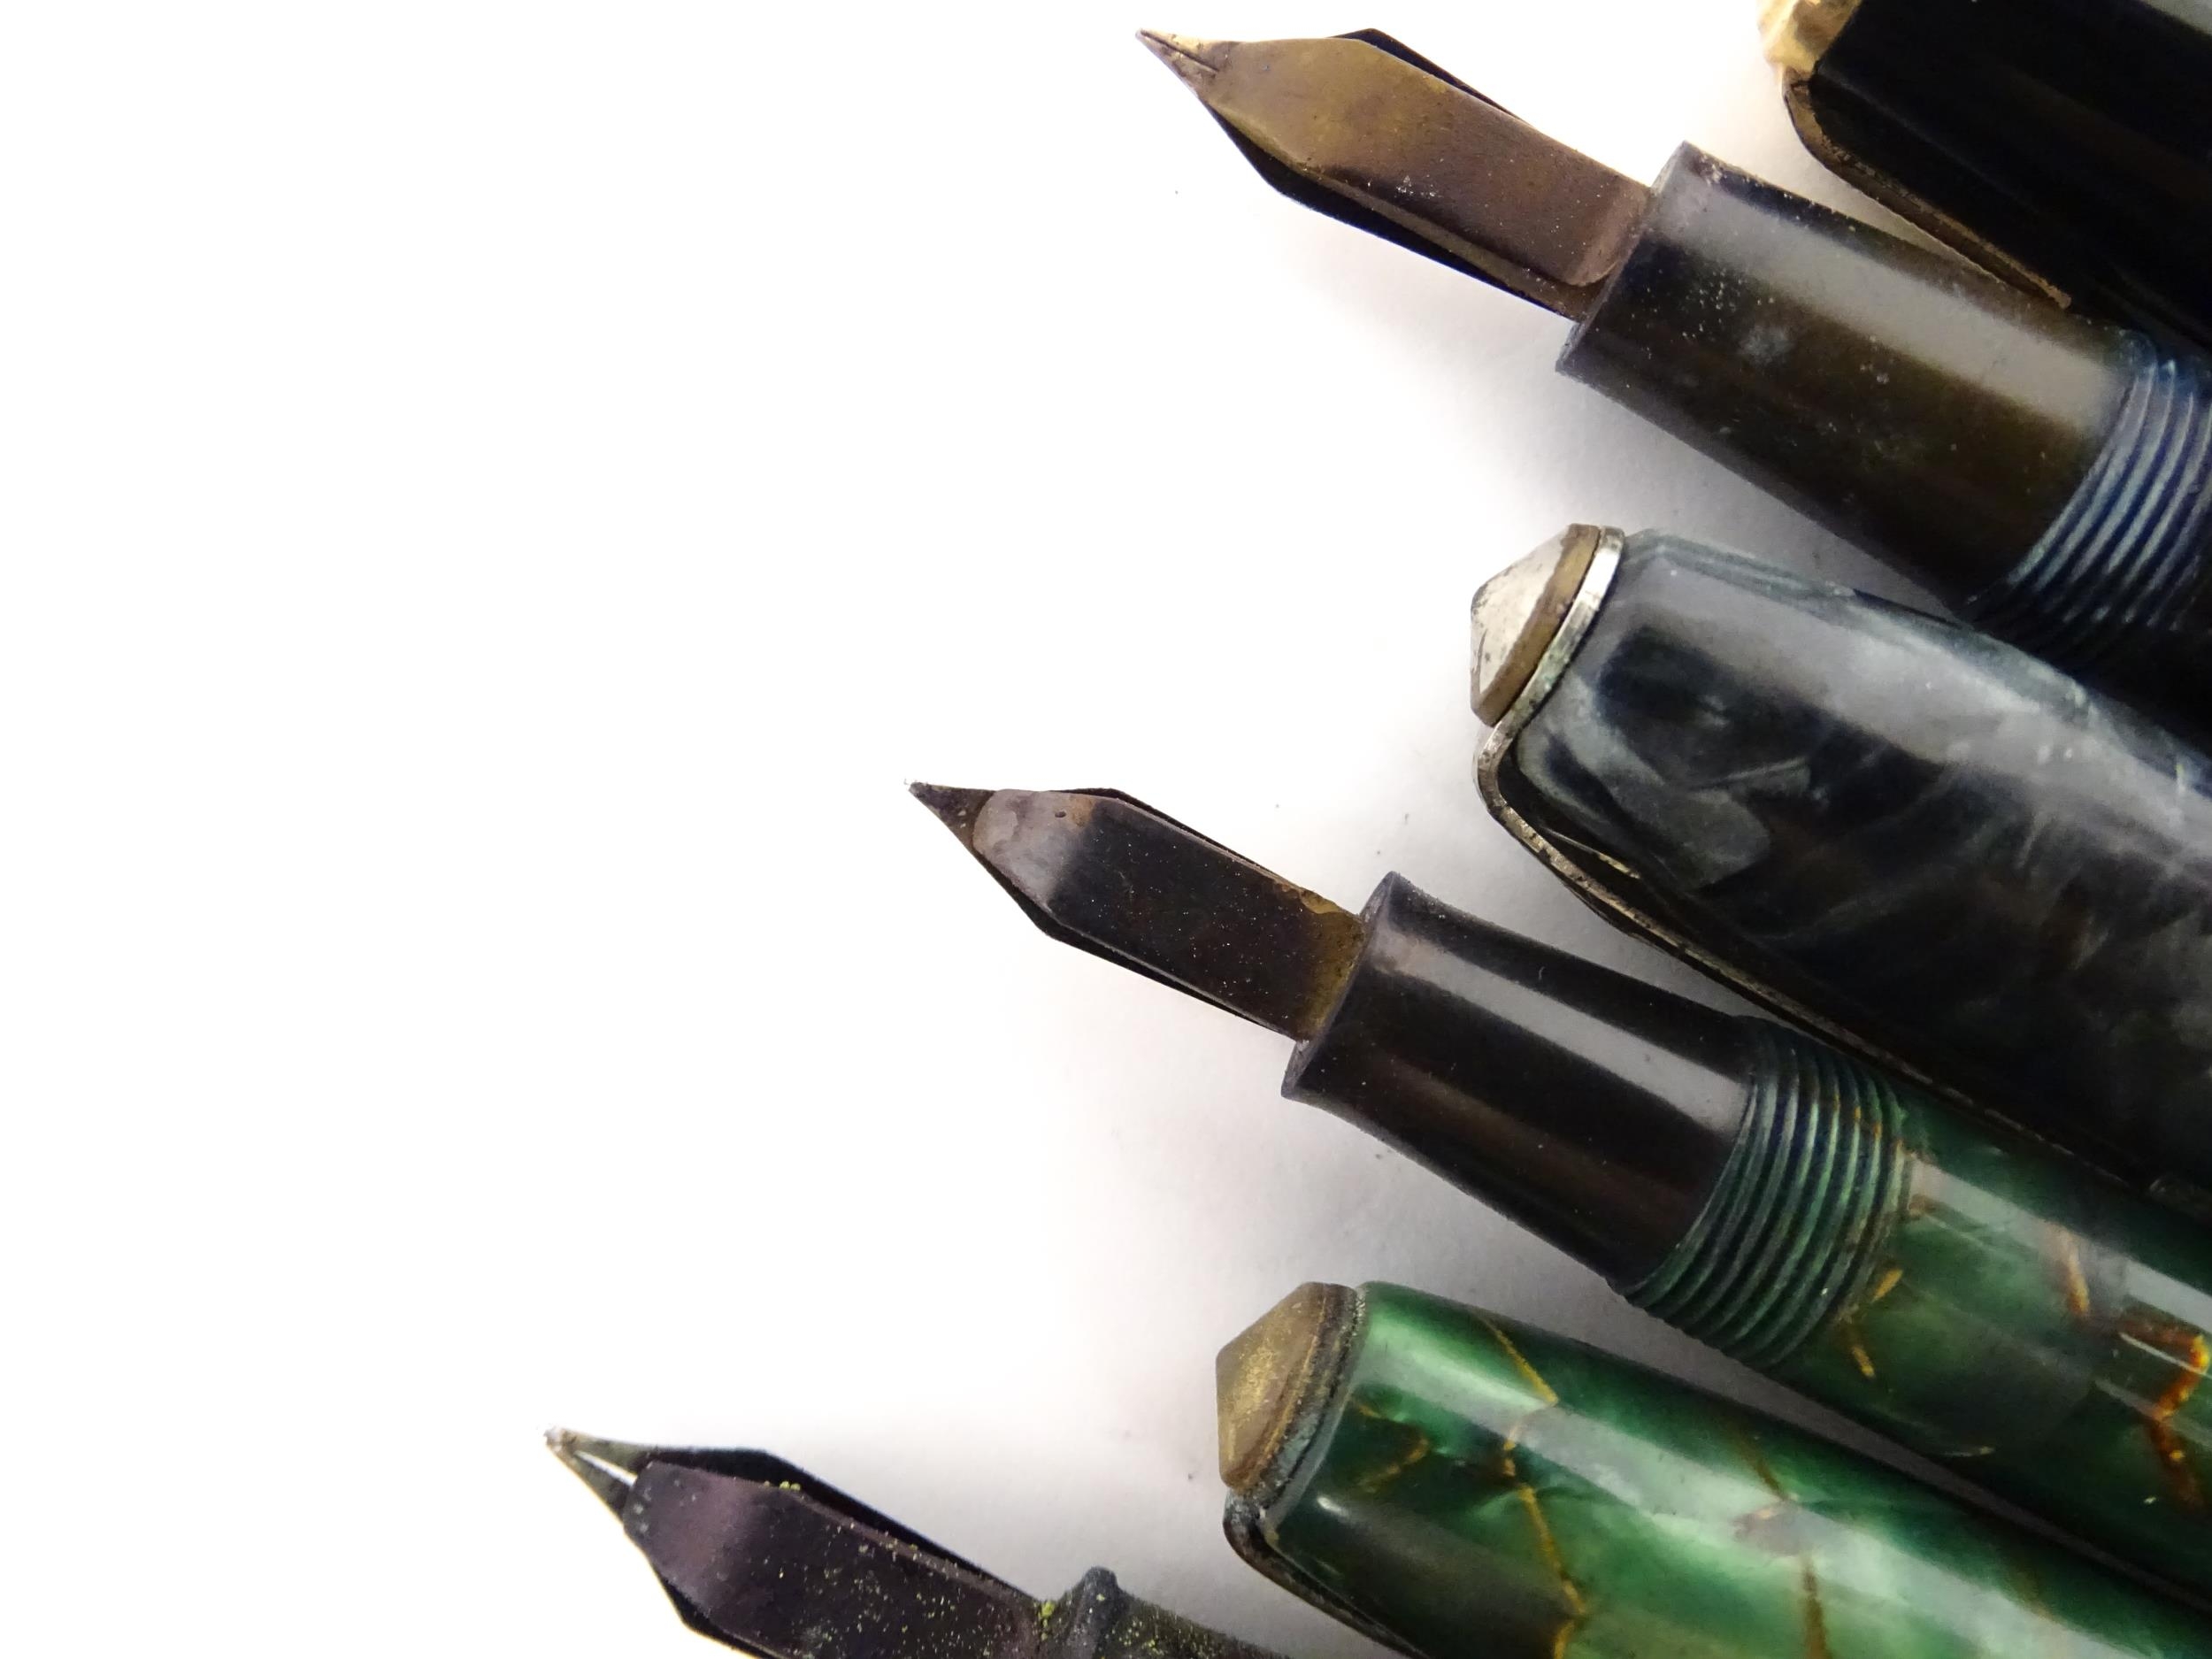 Six fountain pens with 14ct nibs, to include a Parker 'Duofold' with black finish and 14kt gold nib, - Image 21 of 22